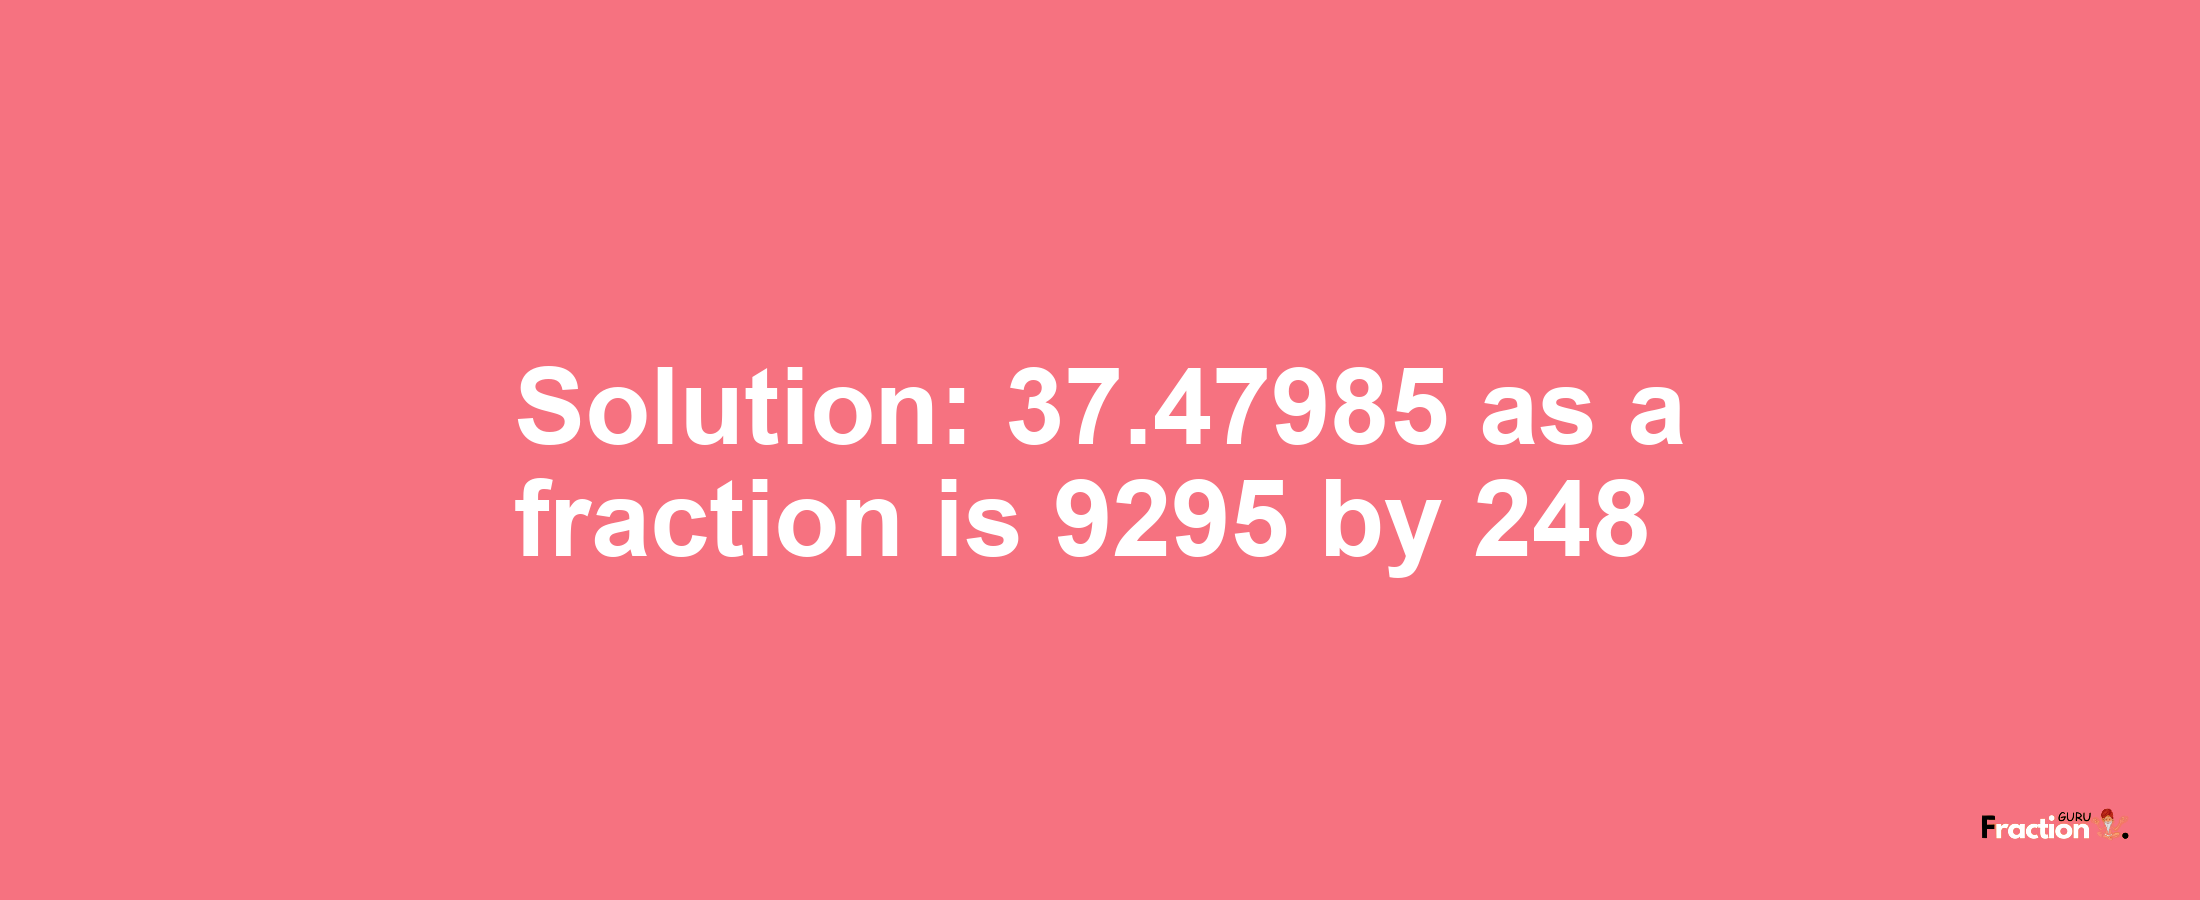 Solution:37.47985 as a fraction is 9295/248